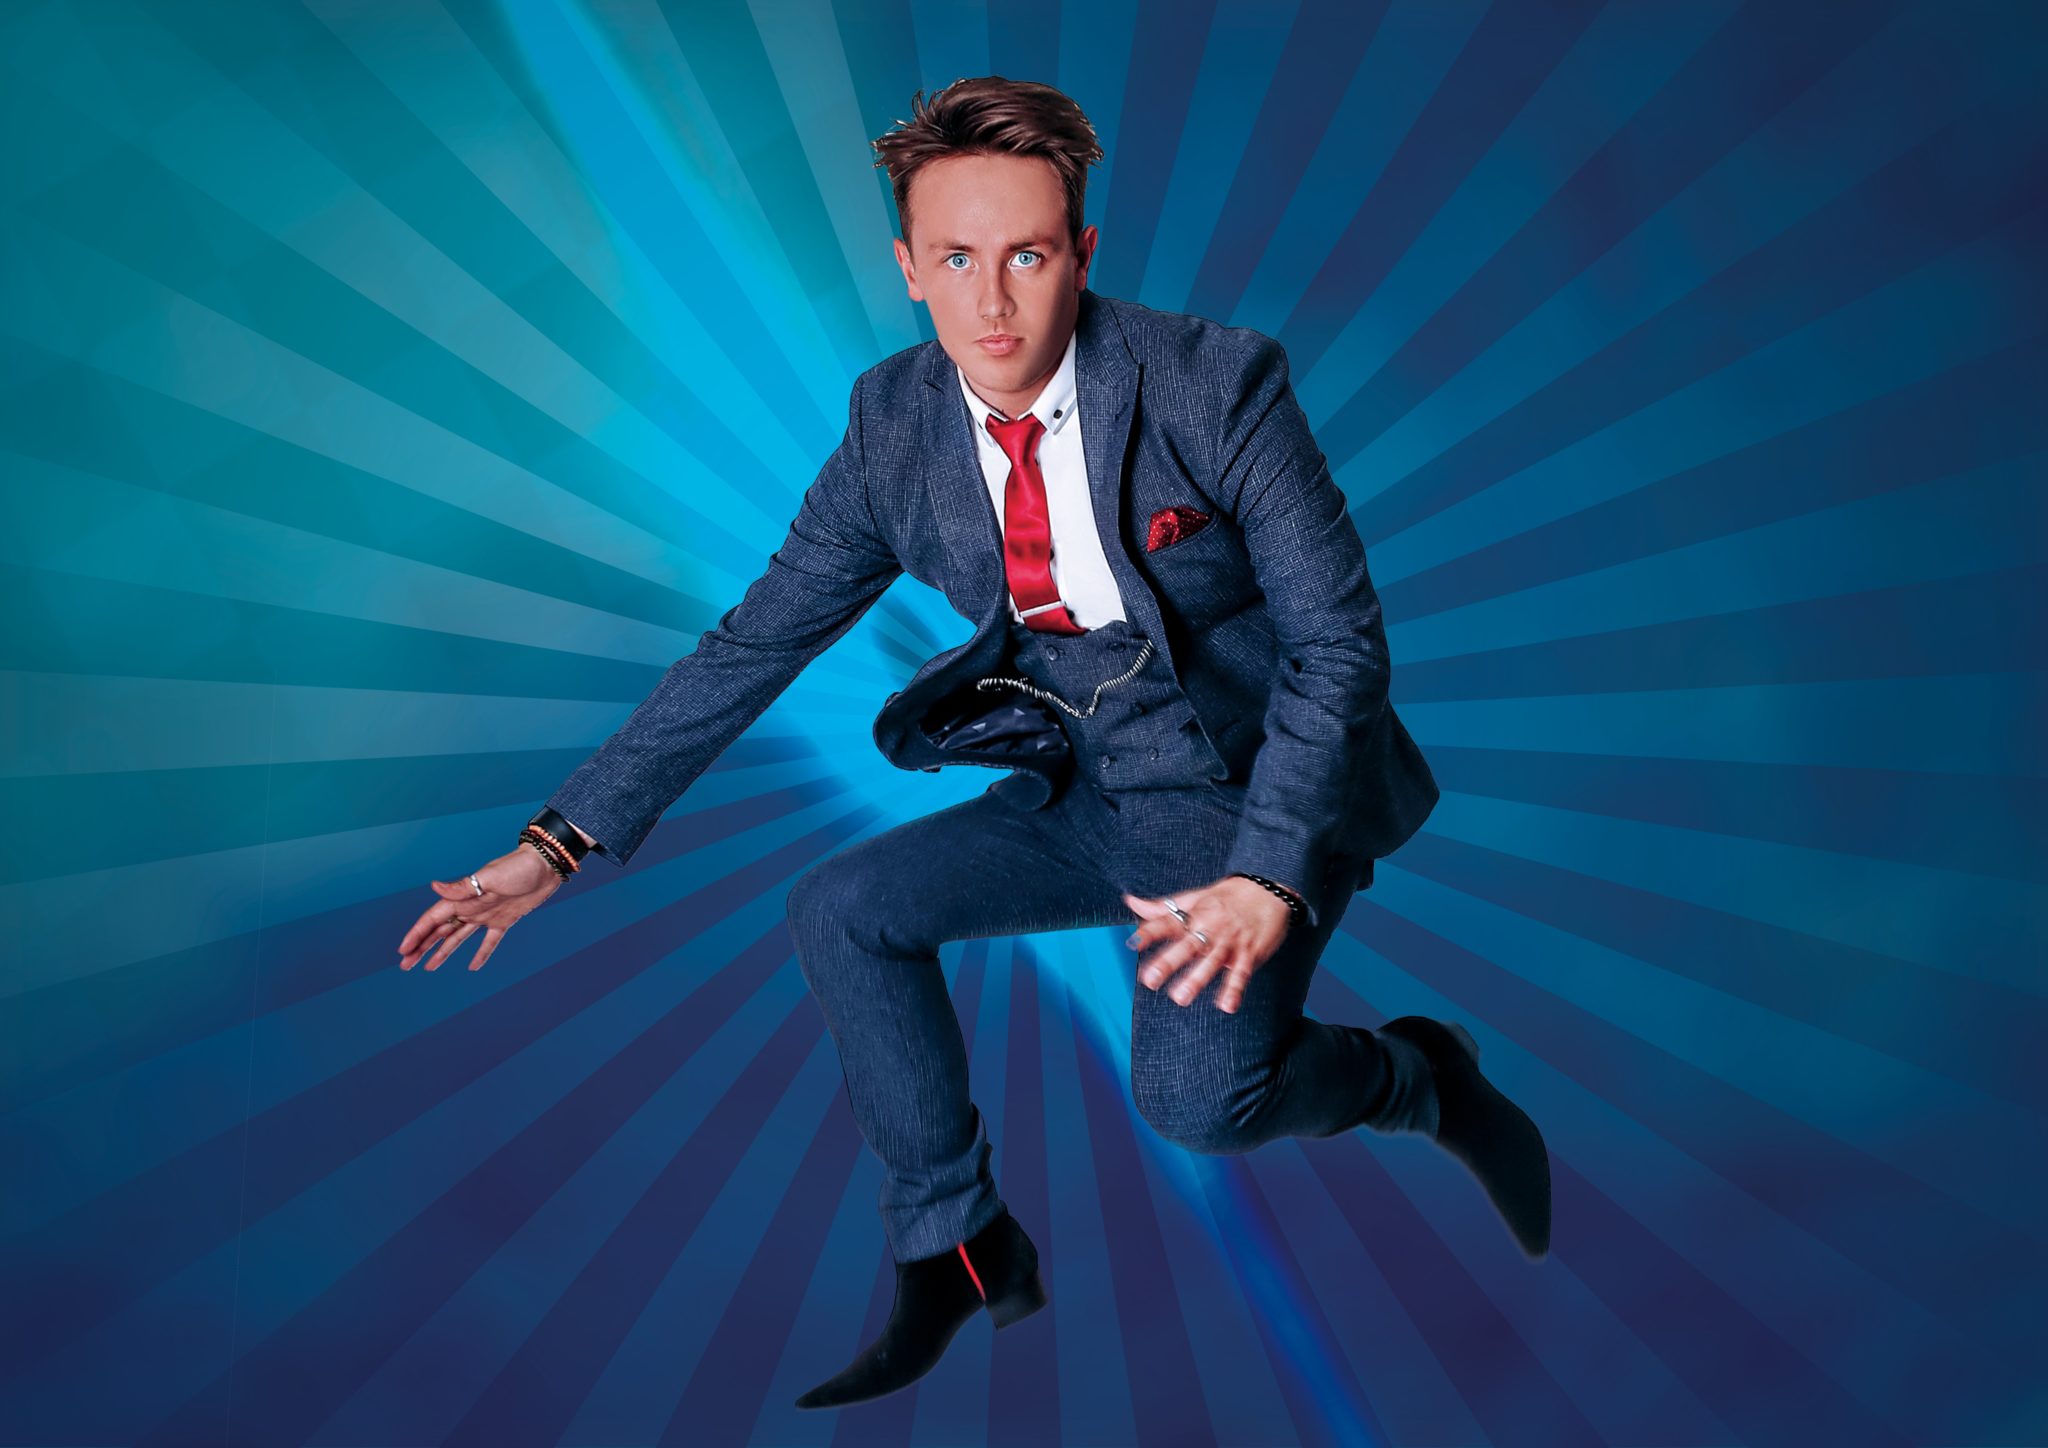 Paul Daniels’ nephew with a show at The Brindley 🗓